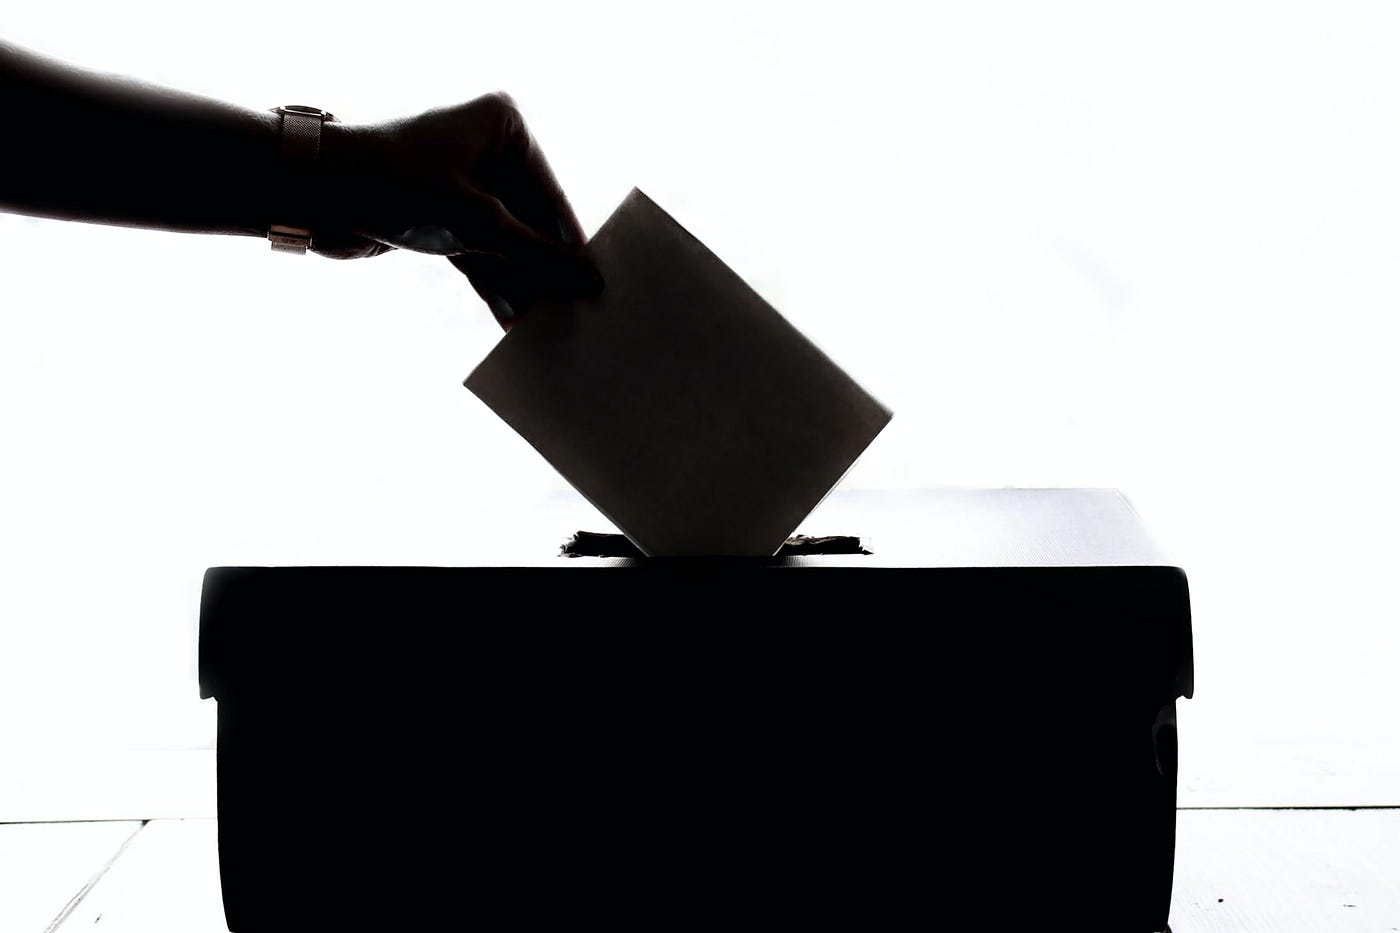 Vote being placed in a ballot box